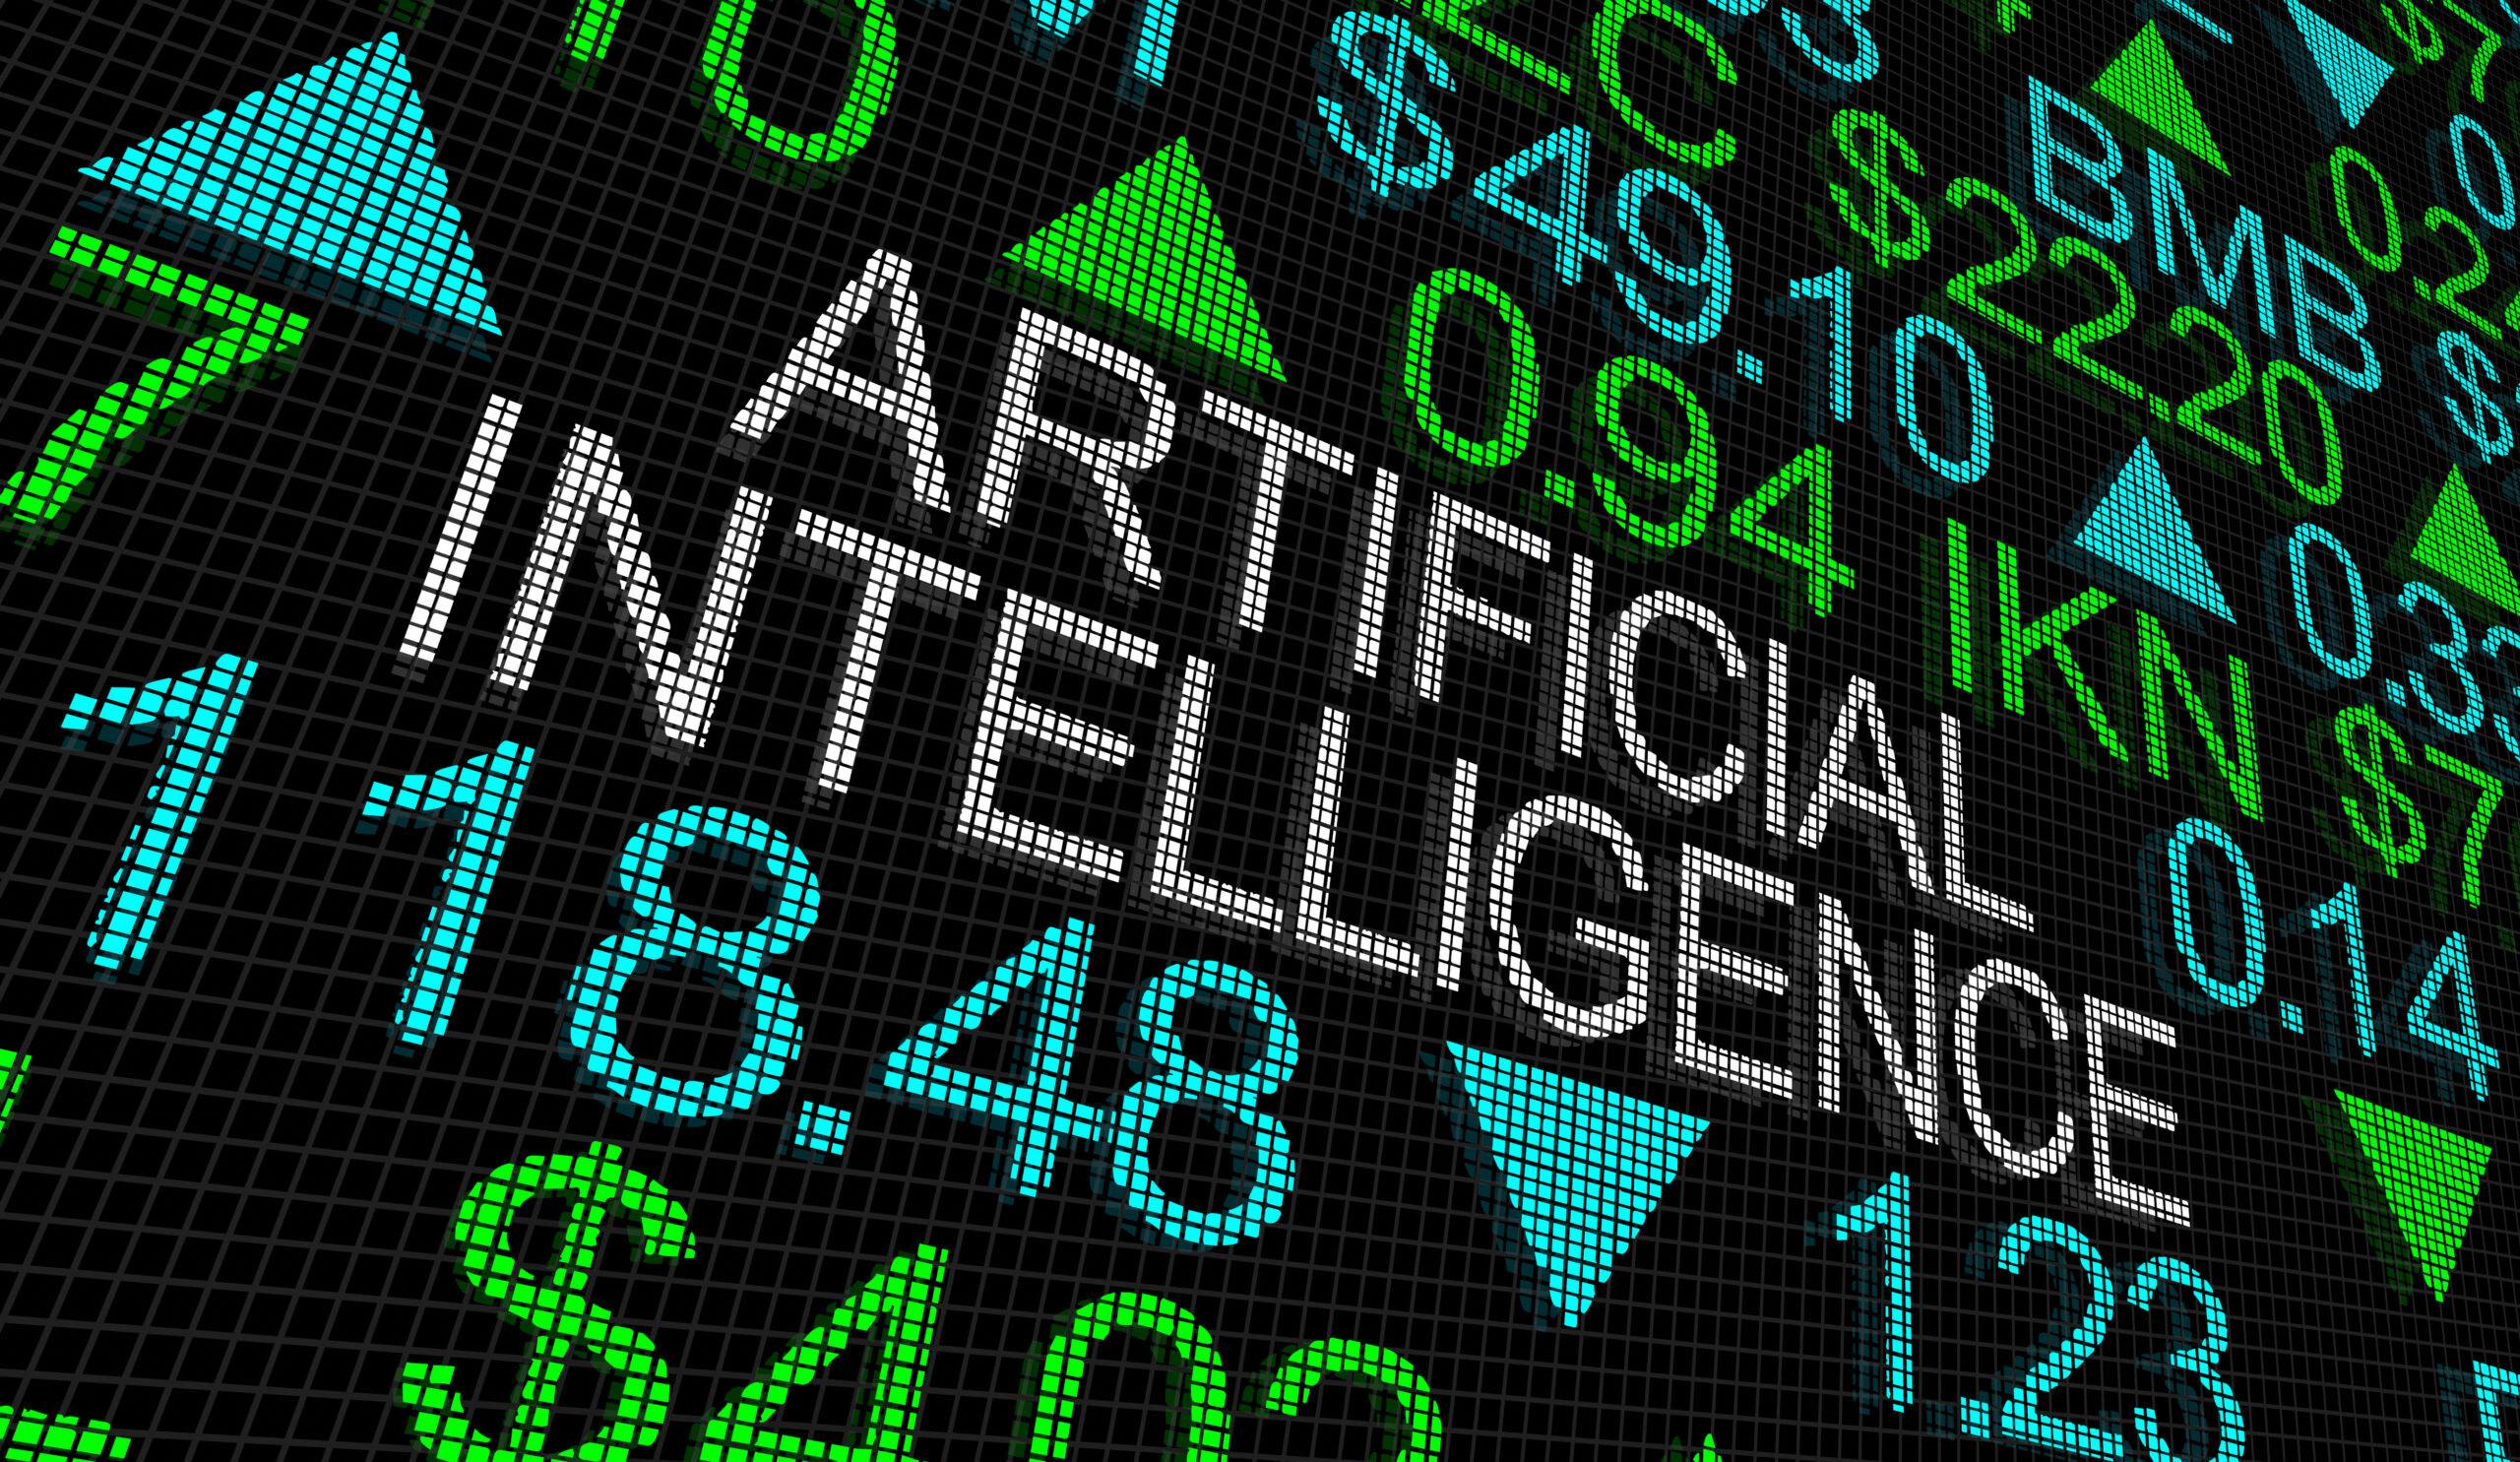 Artificial-Intelligence-Displayed-On-Electronic-Stock-Exchange-Ticker